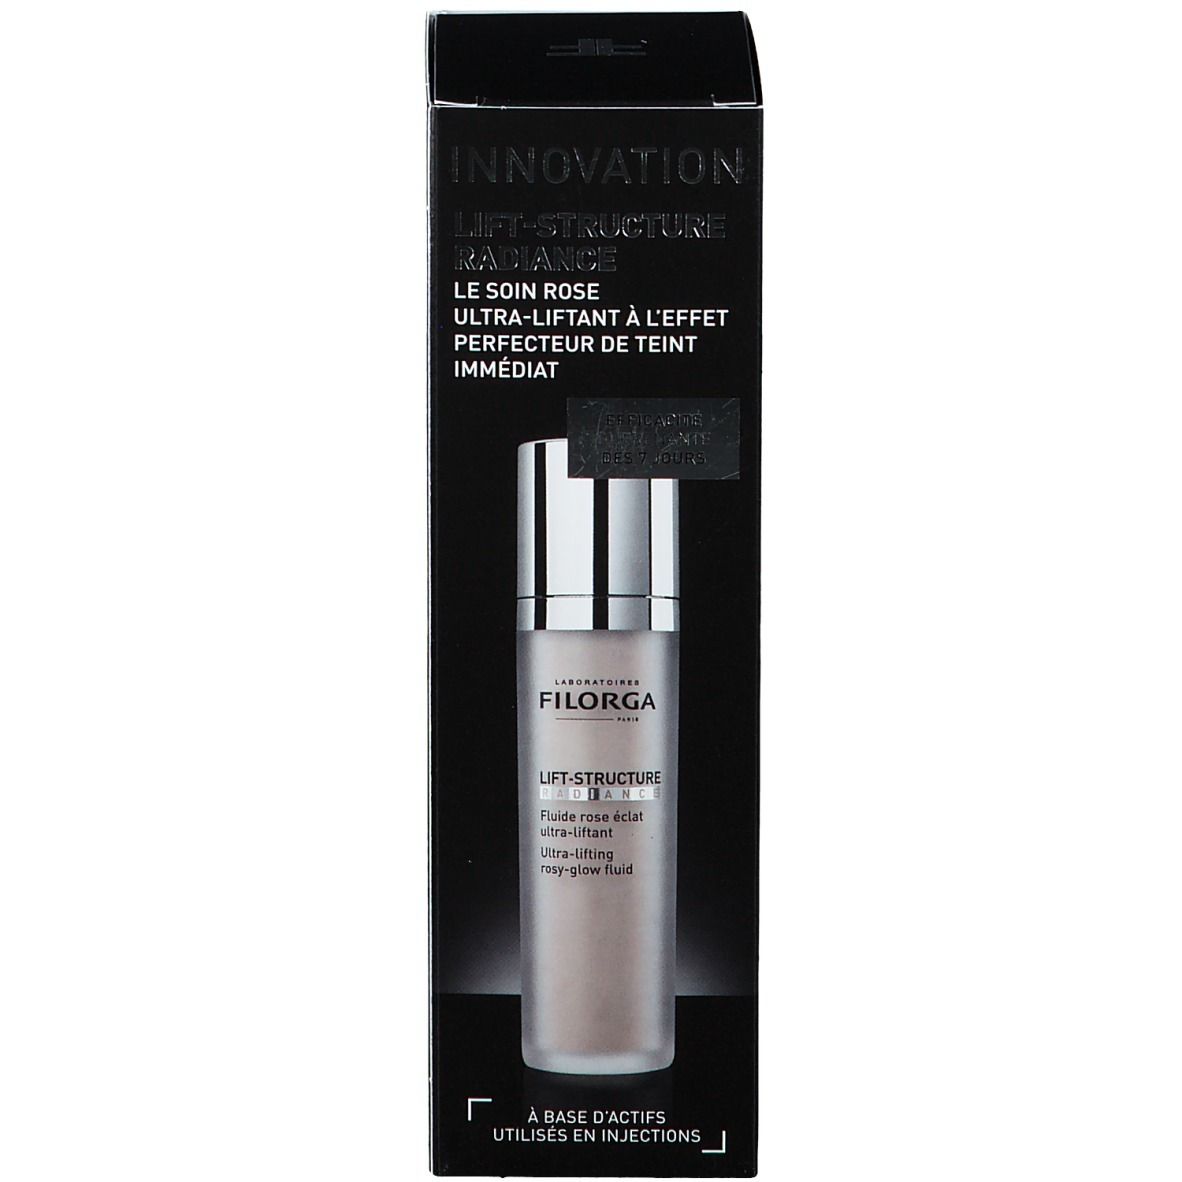 Filorga Lift-Structure Radiance Ultra-Lifting Rosy-Glow Fluid